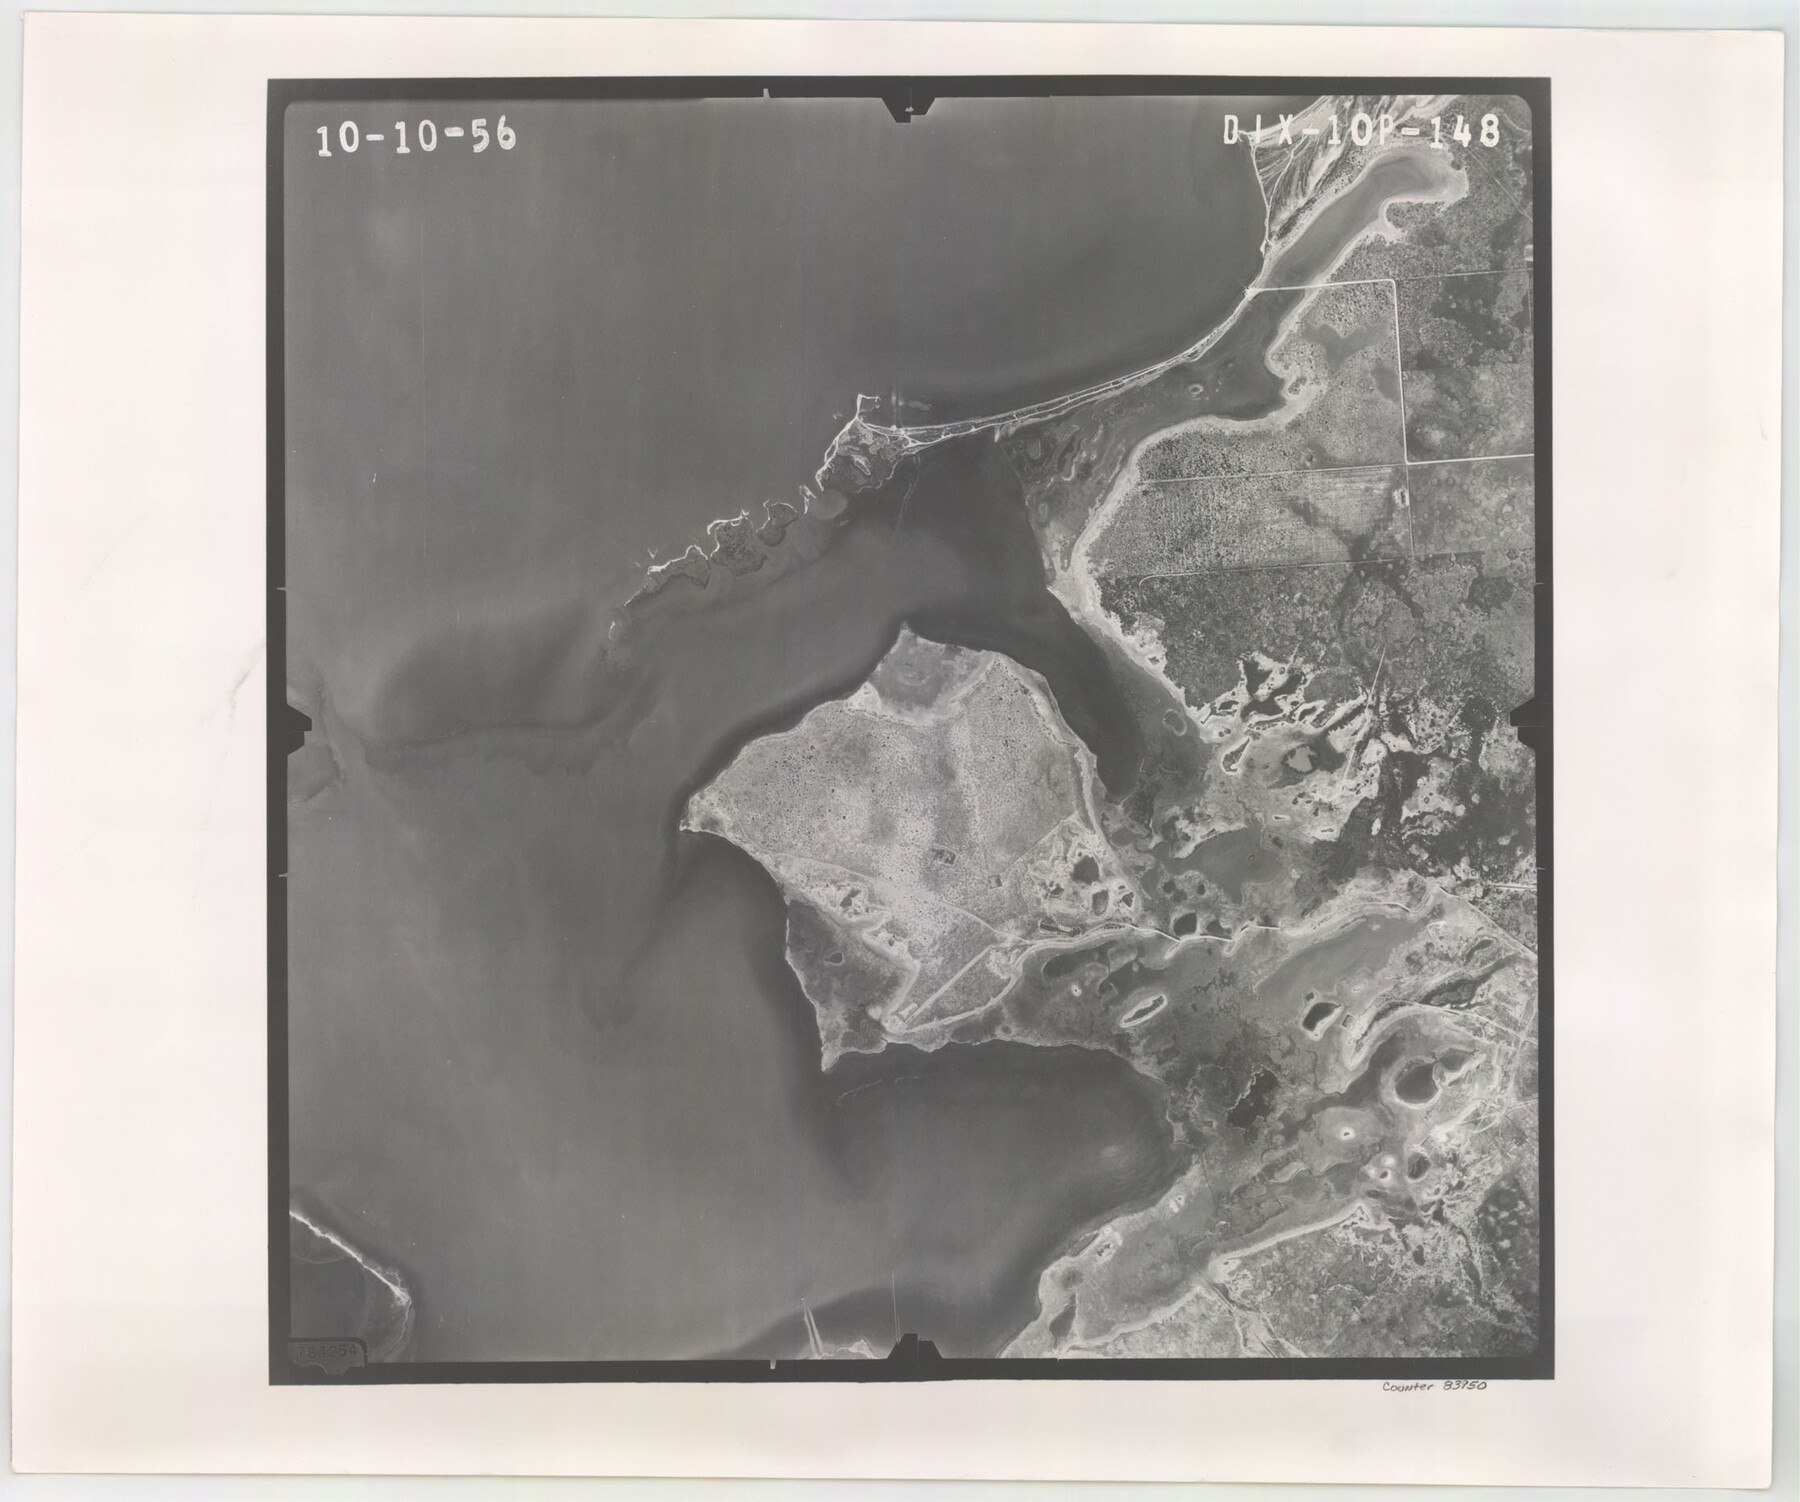 83950, Flight Mission No. DIX-10P, Frame 148, Aransas County, General Map Collection